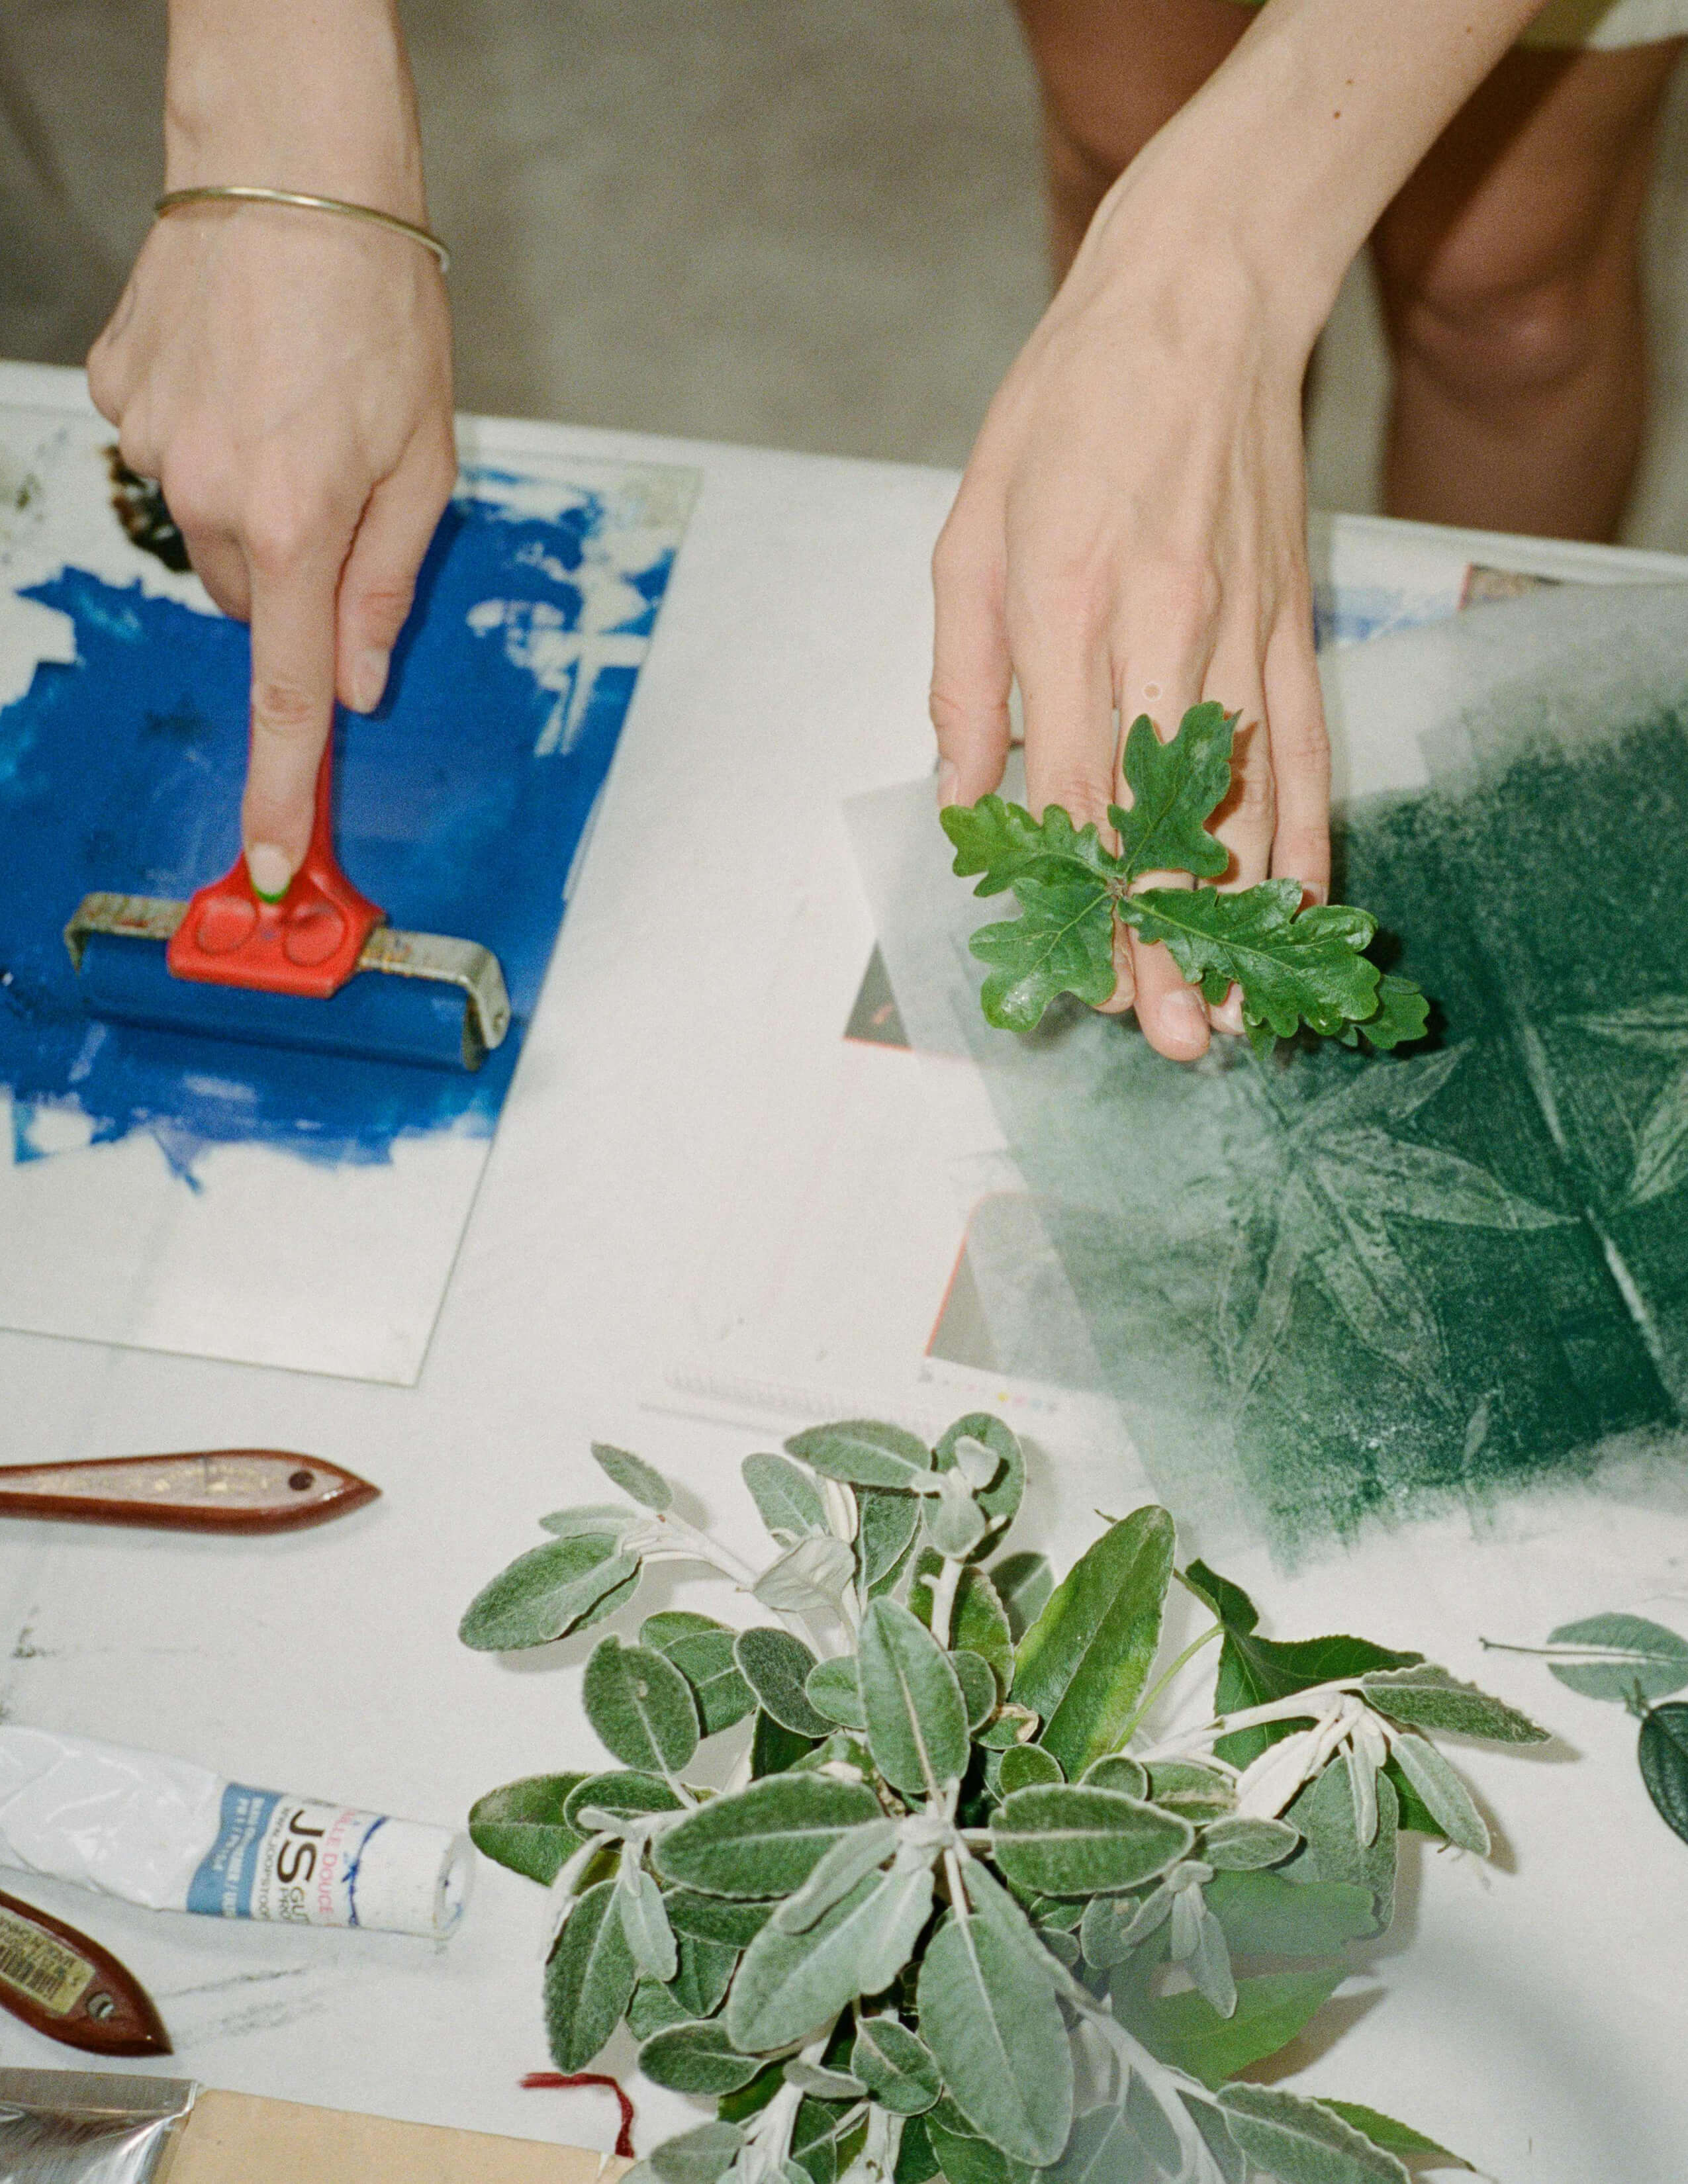 A hand held a roller with blue paint while another hand held a piece of plants with a piece of sheet covered with green paint on the table. And there is the blue paint material, palette knife and a pot of plant.